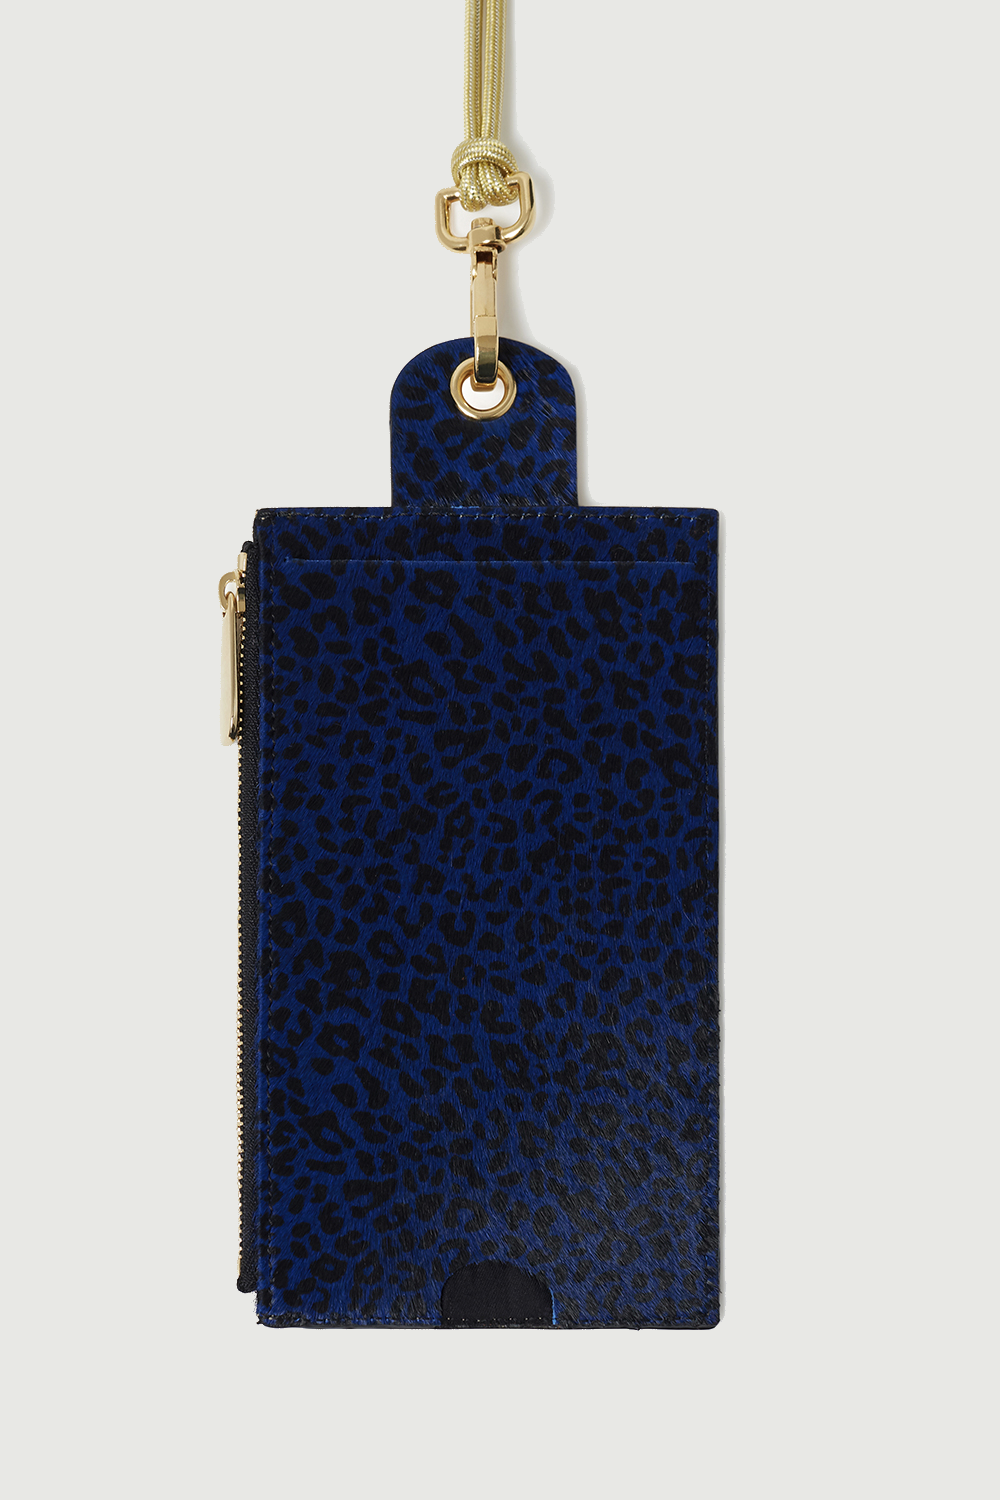 The Minis - Large neck wallet in blue Cheetah printed leather